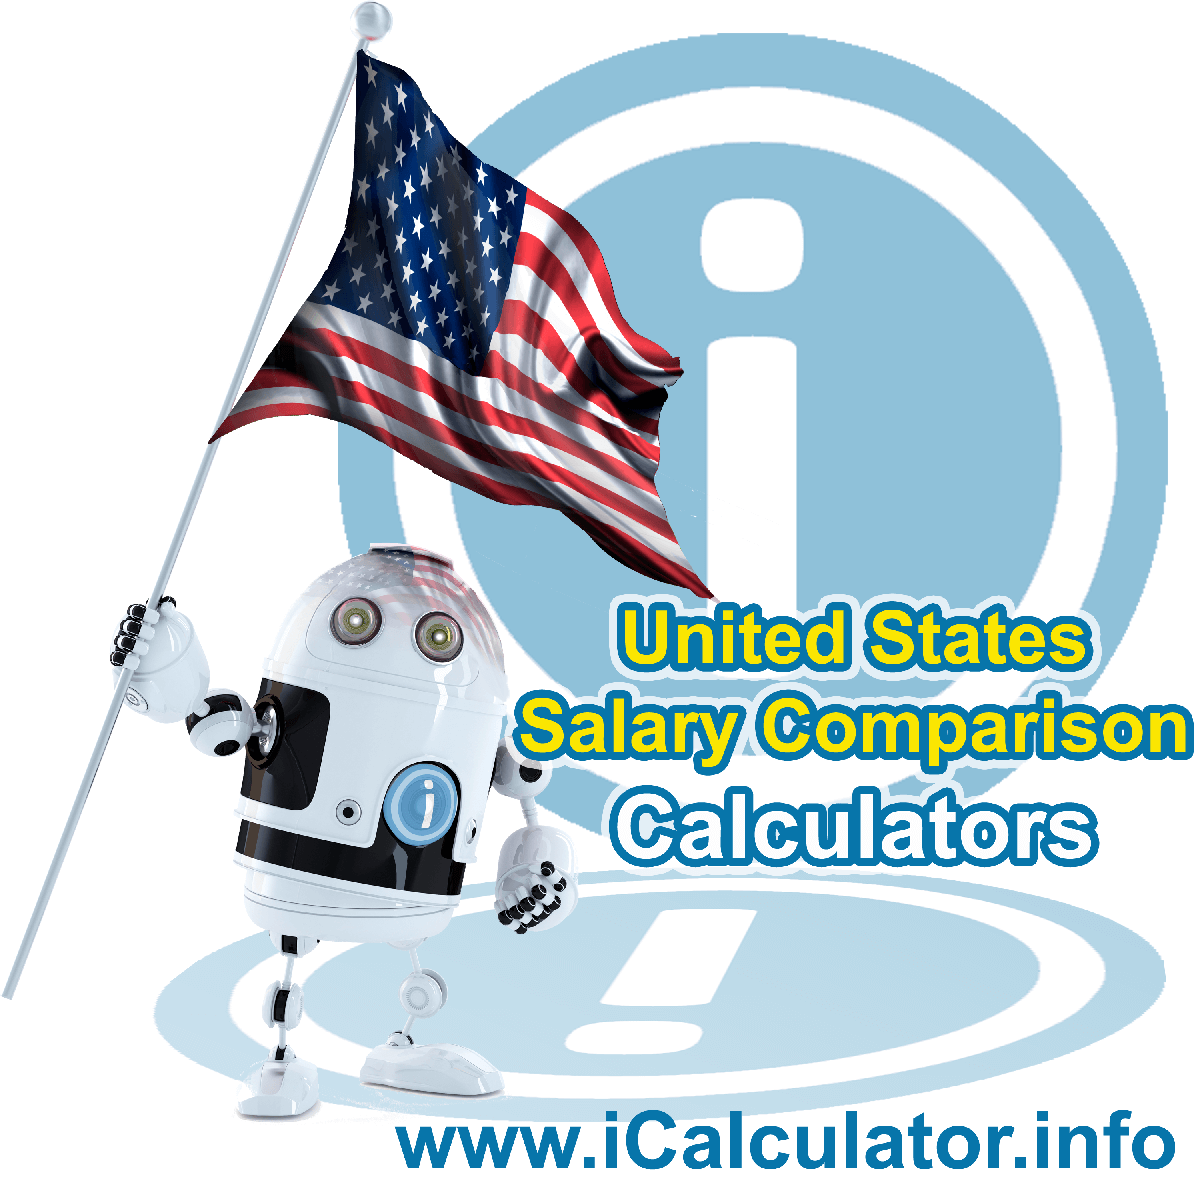 United States Salary Comparison Calculator 2023 | iCalculator™ | The United States Salary Comparison Calculator allows you to quickly compare several salaries adjacent each other to see the best salary after tax including Federal State Tax, Medicare Deductions, Social Security, Capital Gains and other income tax and salary deductions complete with supporting income tax tables 